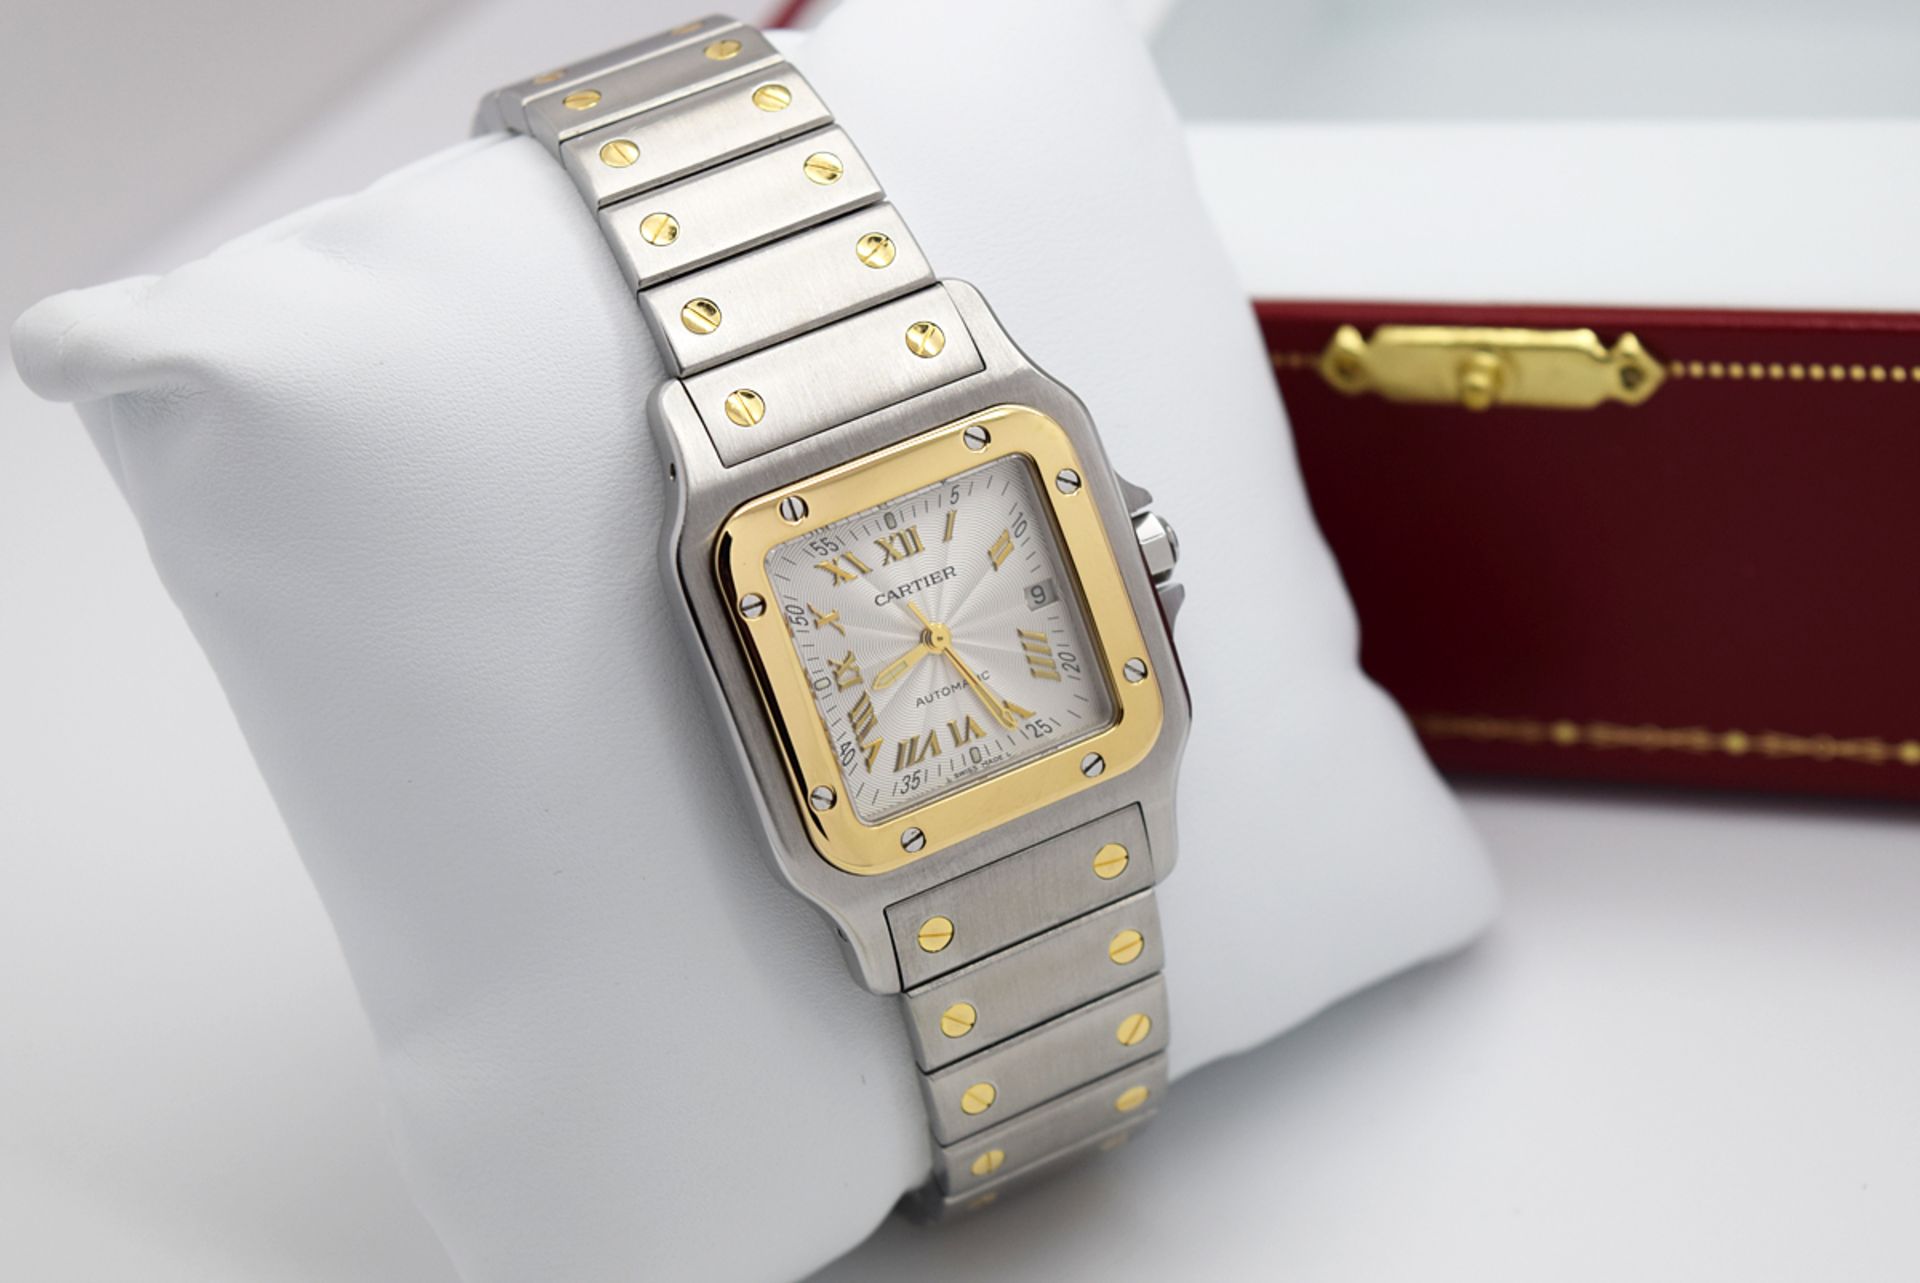 *Large* Cartier Santos 'Galbee' 18k Gold and Steel Model - Anniversary Dial! - Image 10 of 10